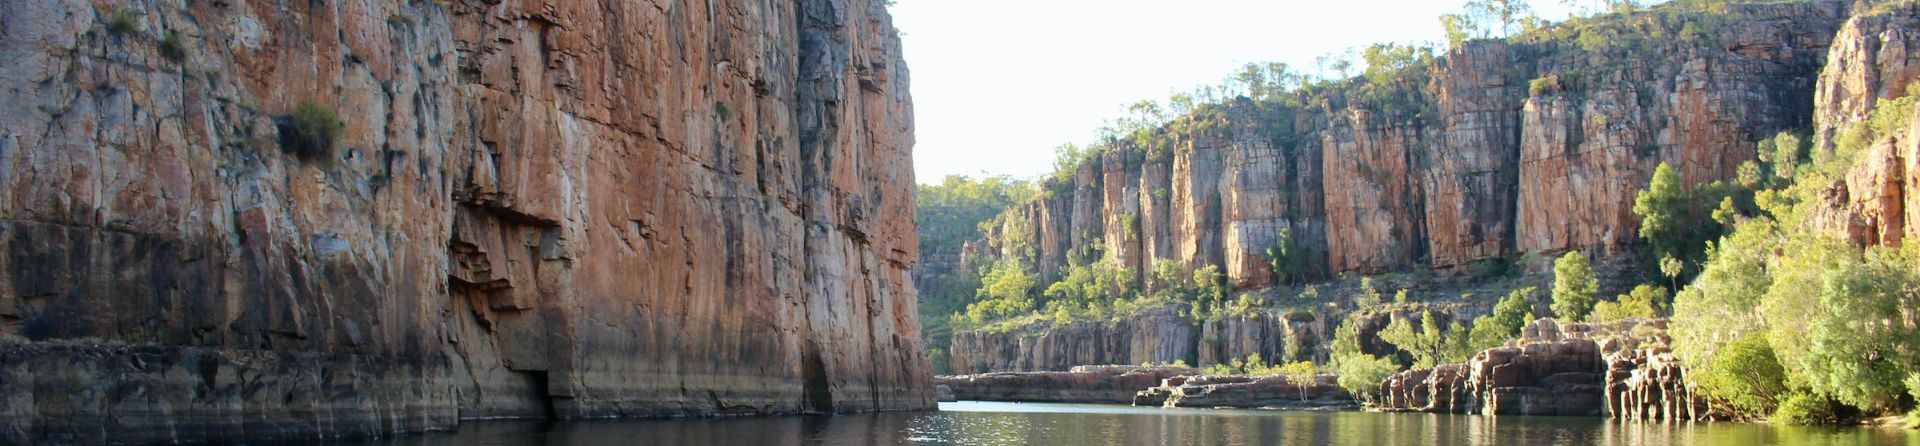 When is the best time to visit Katherine Gorge?